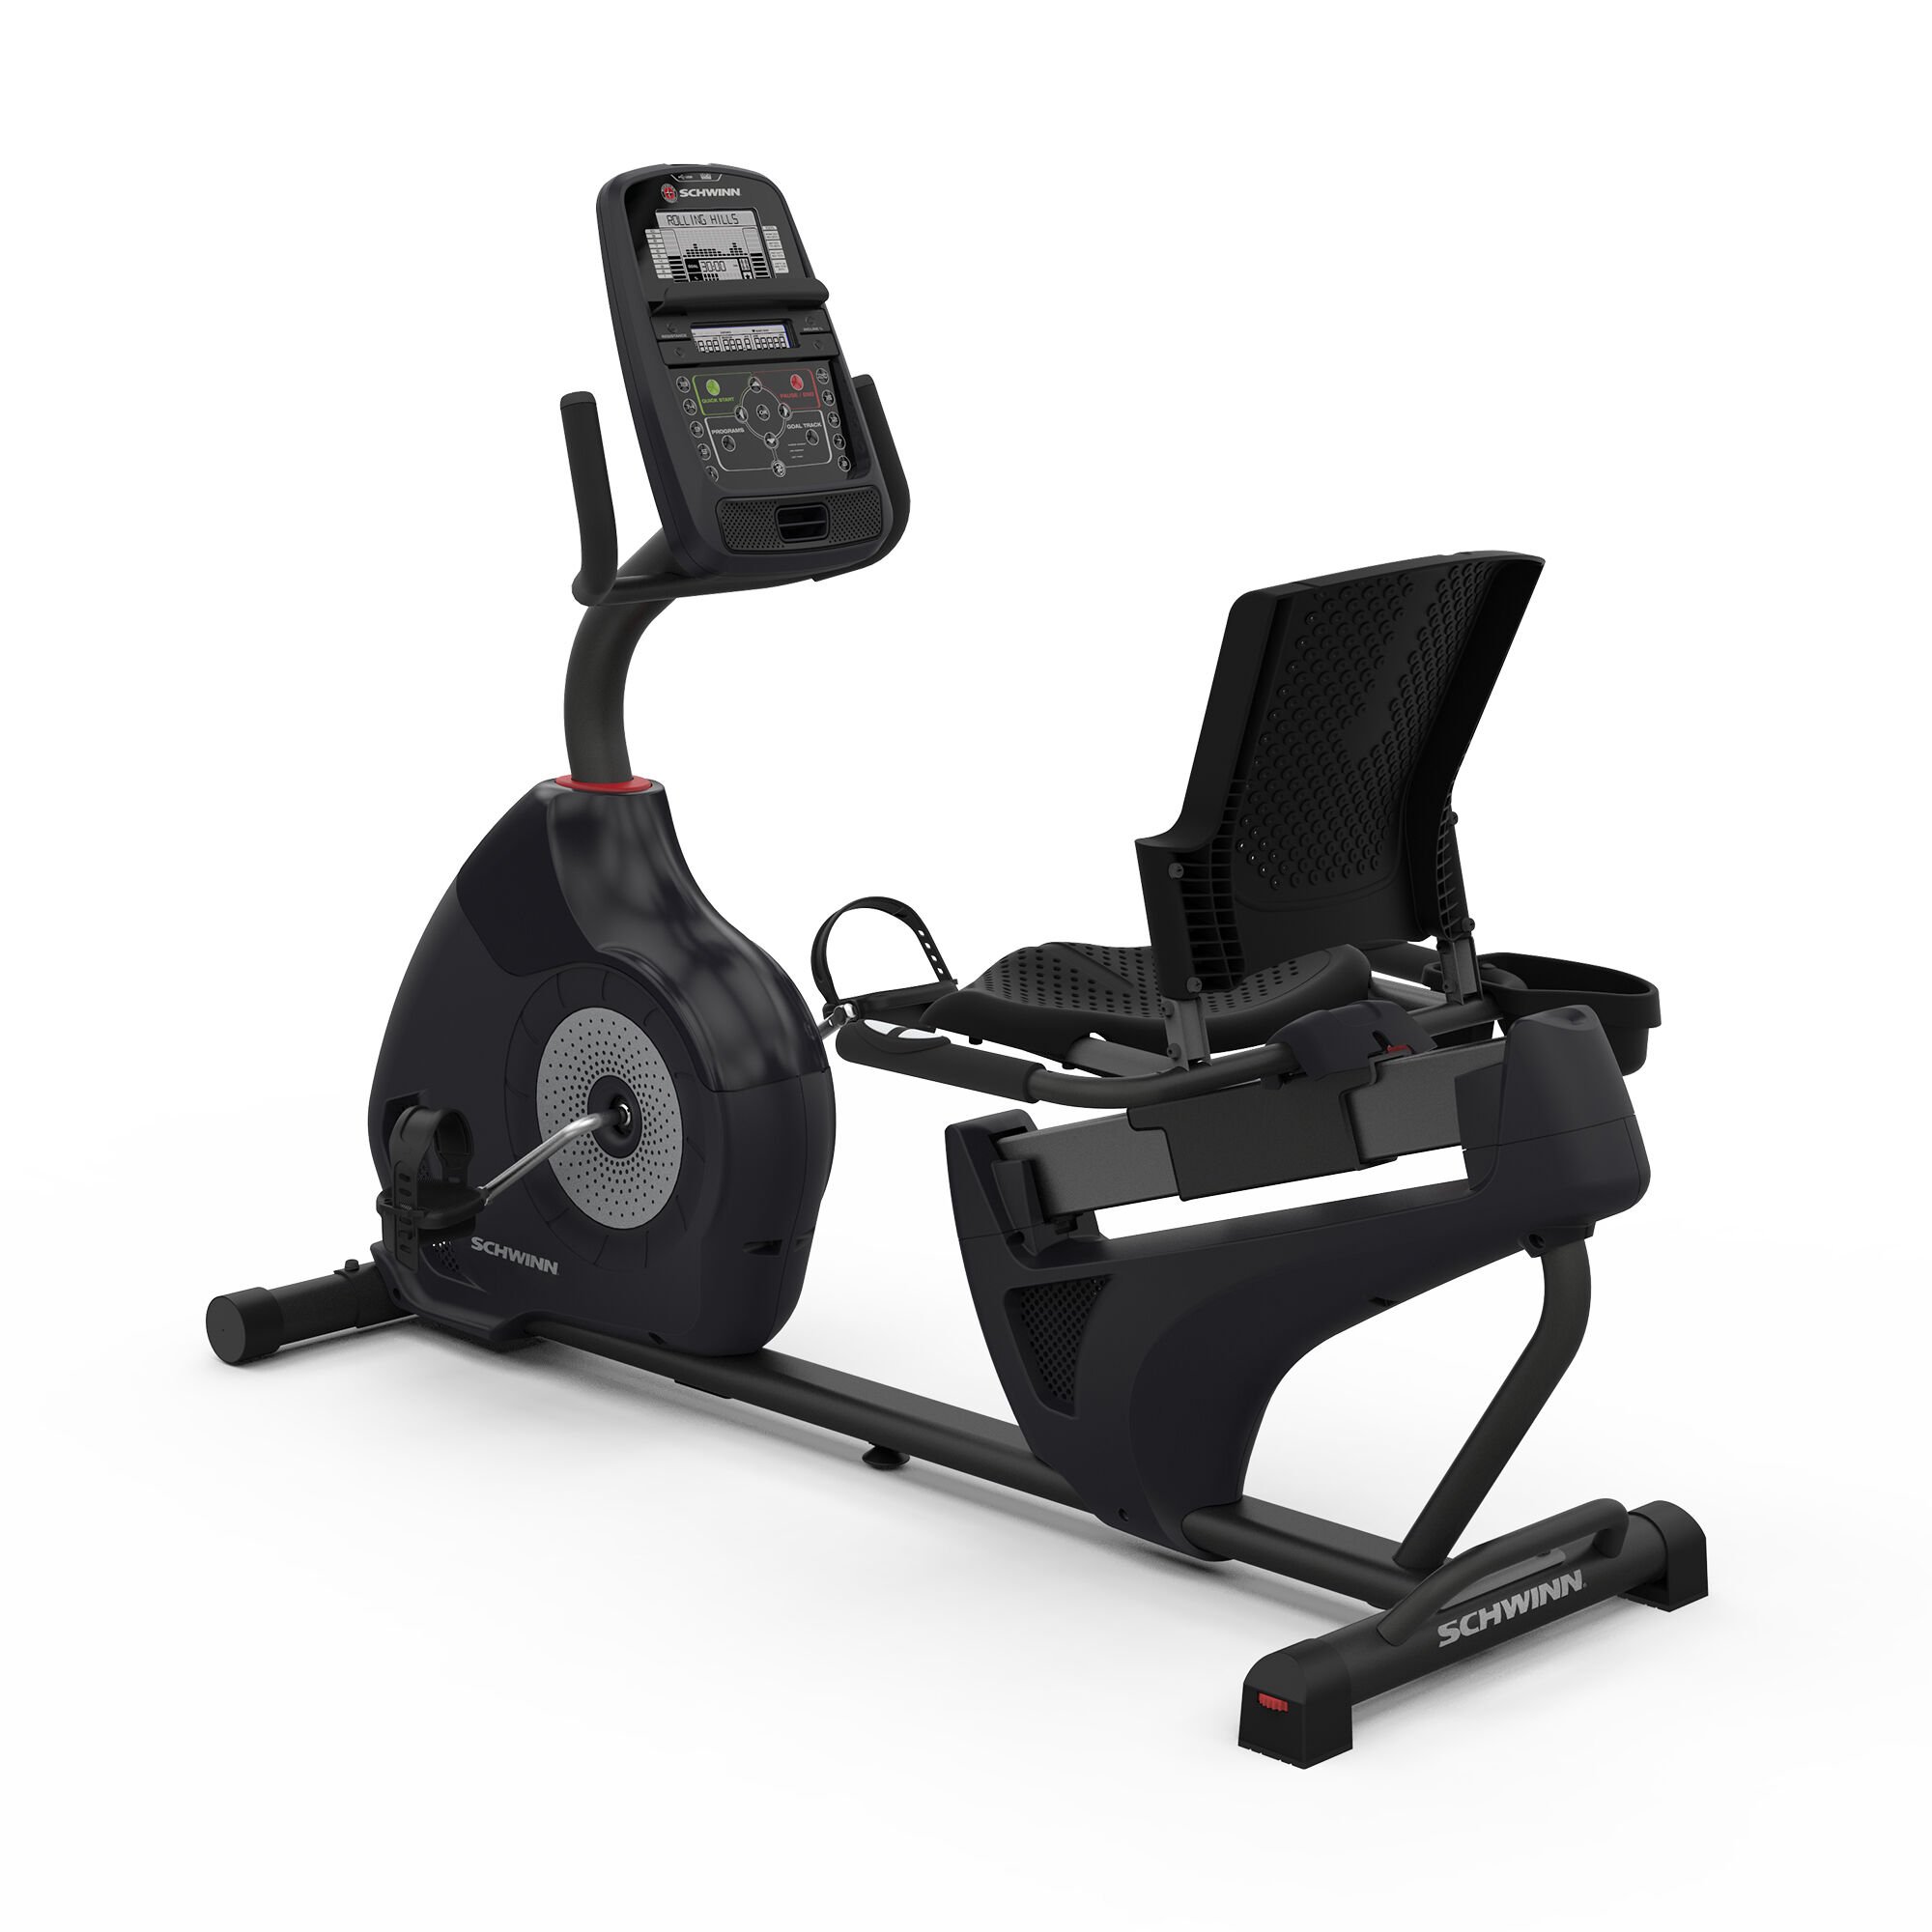 Details about   Schwinn Fitness 230 Recumbent Cardio Exercise Bike Black Local Pickup only 27587 